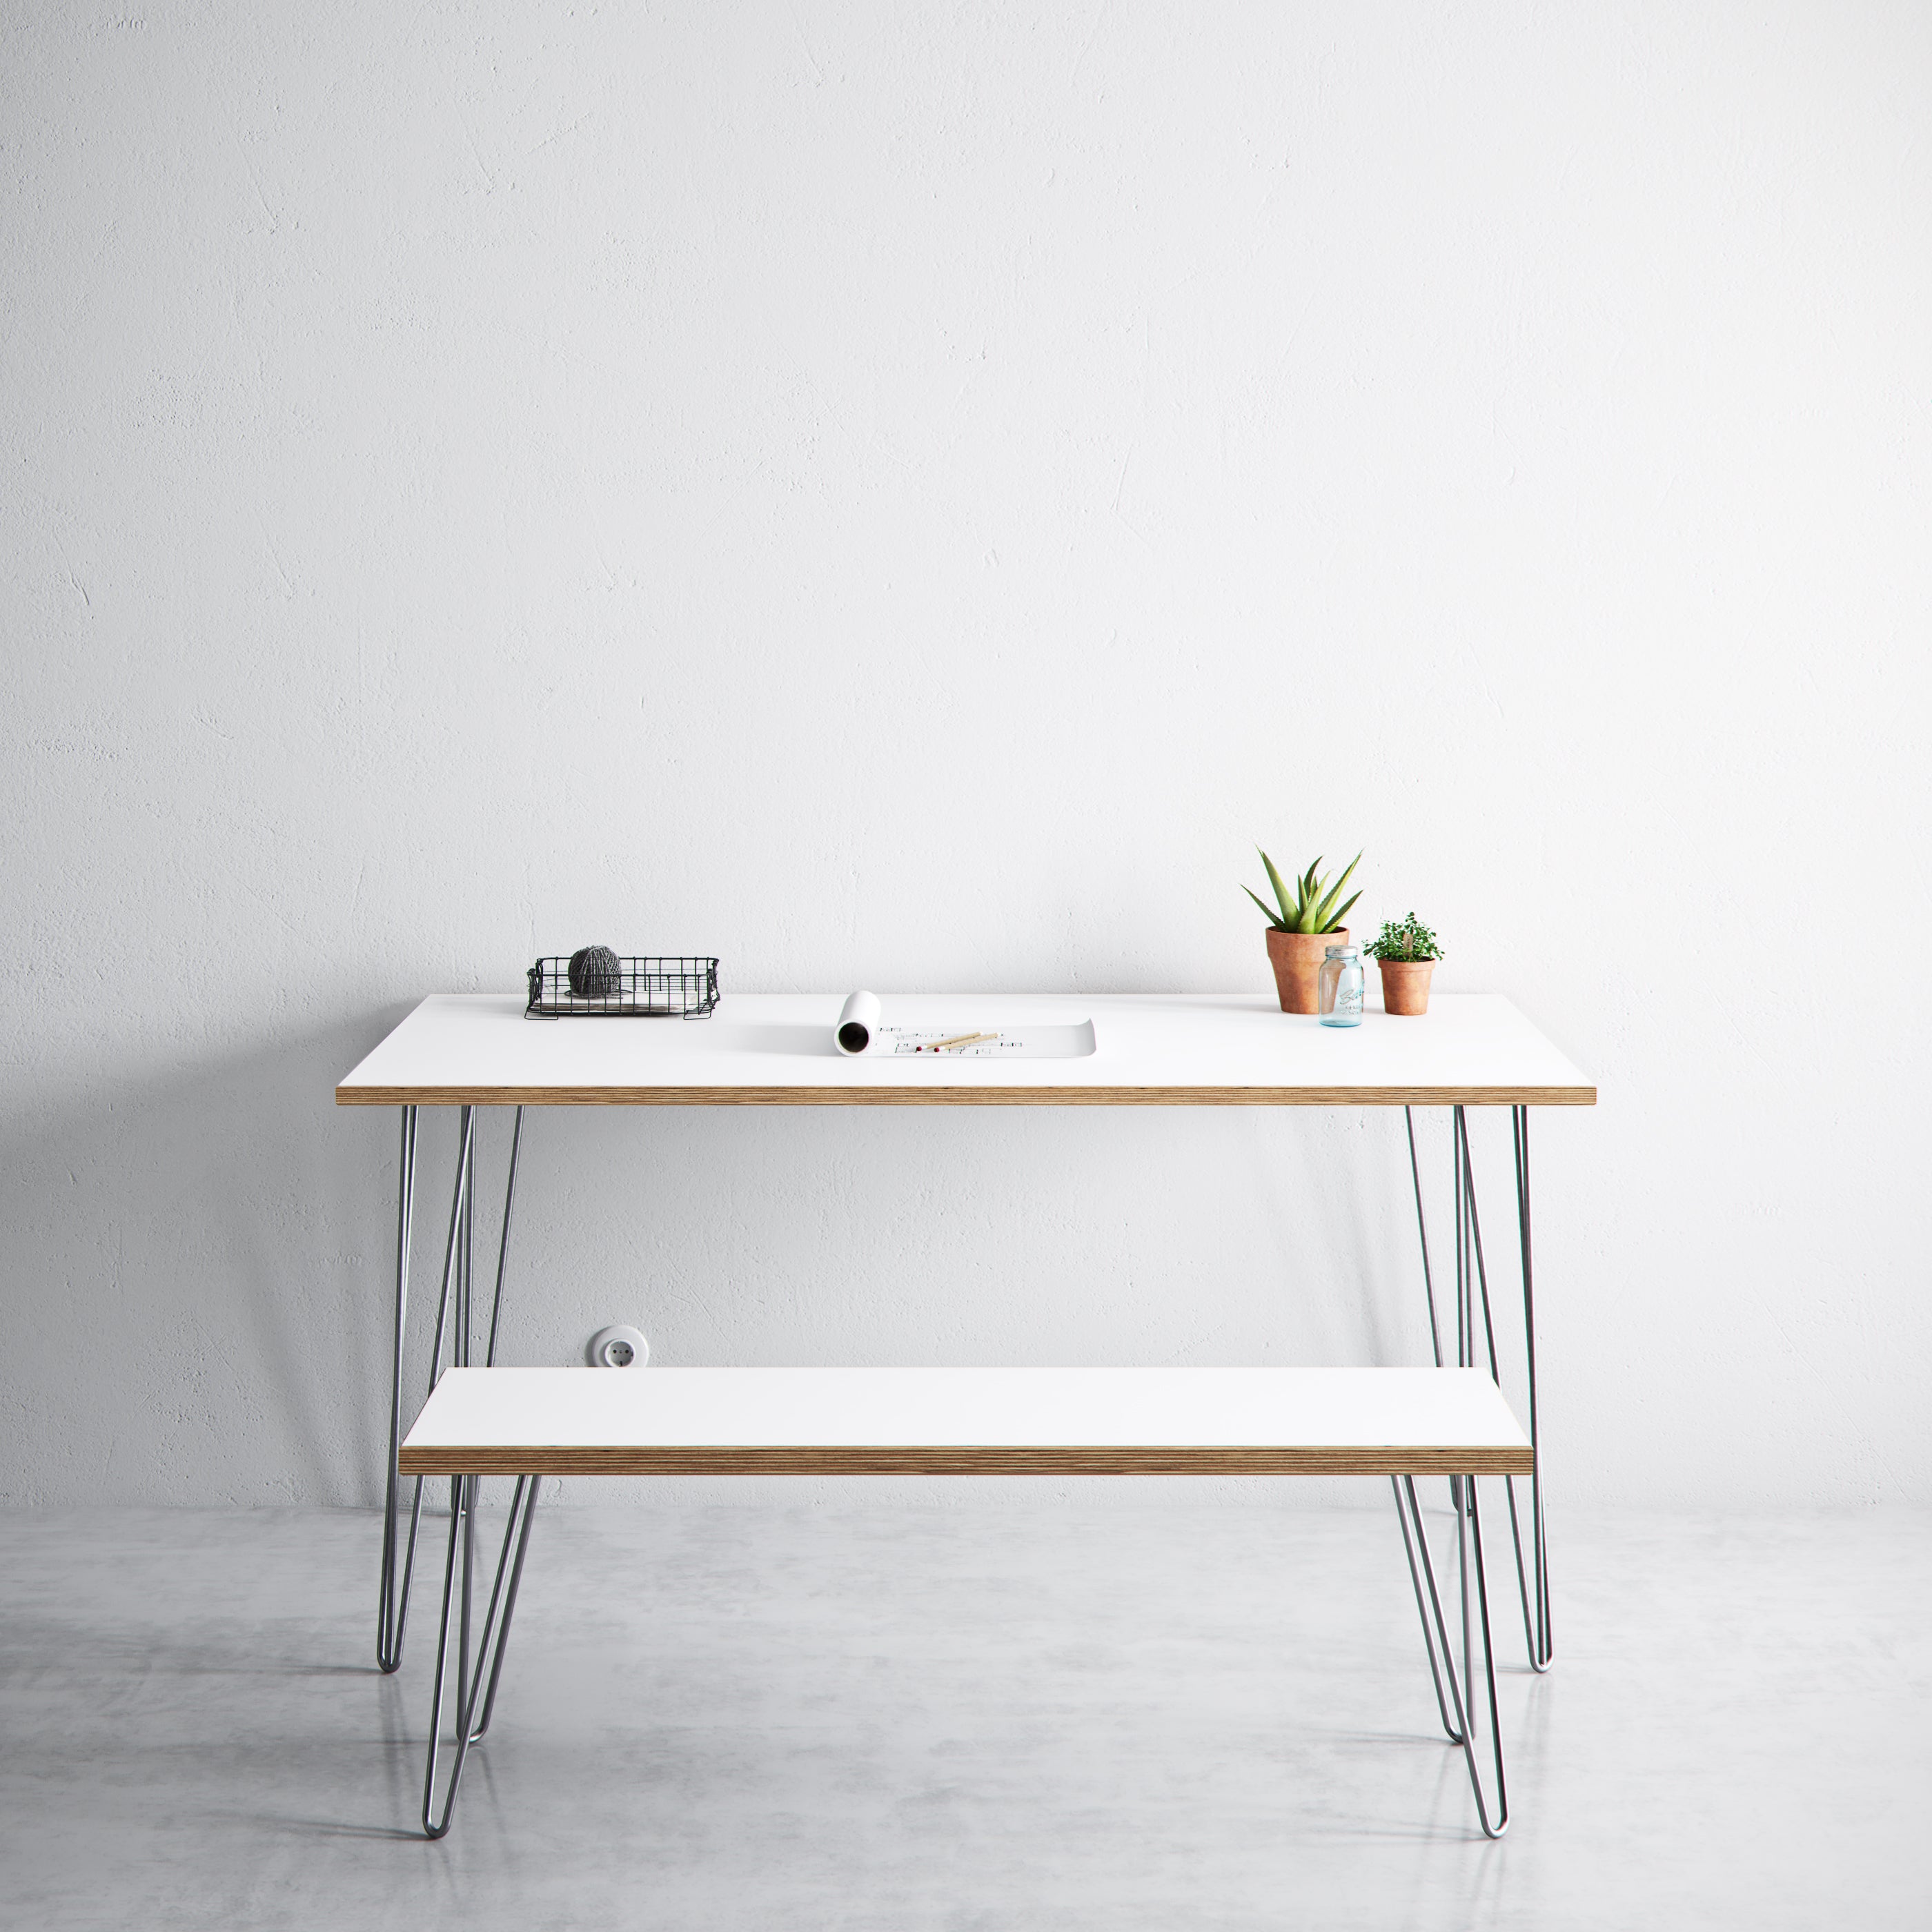 Formica Plywood Bench Top